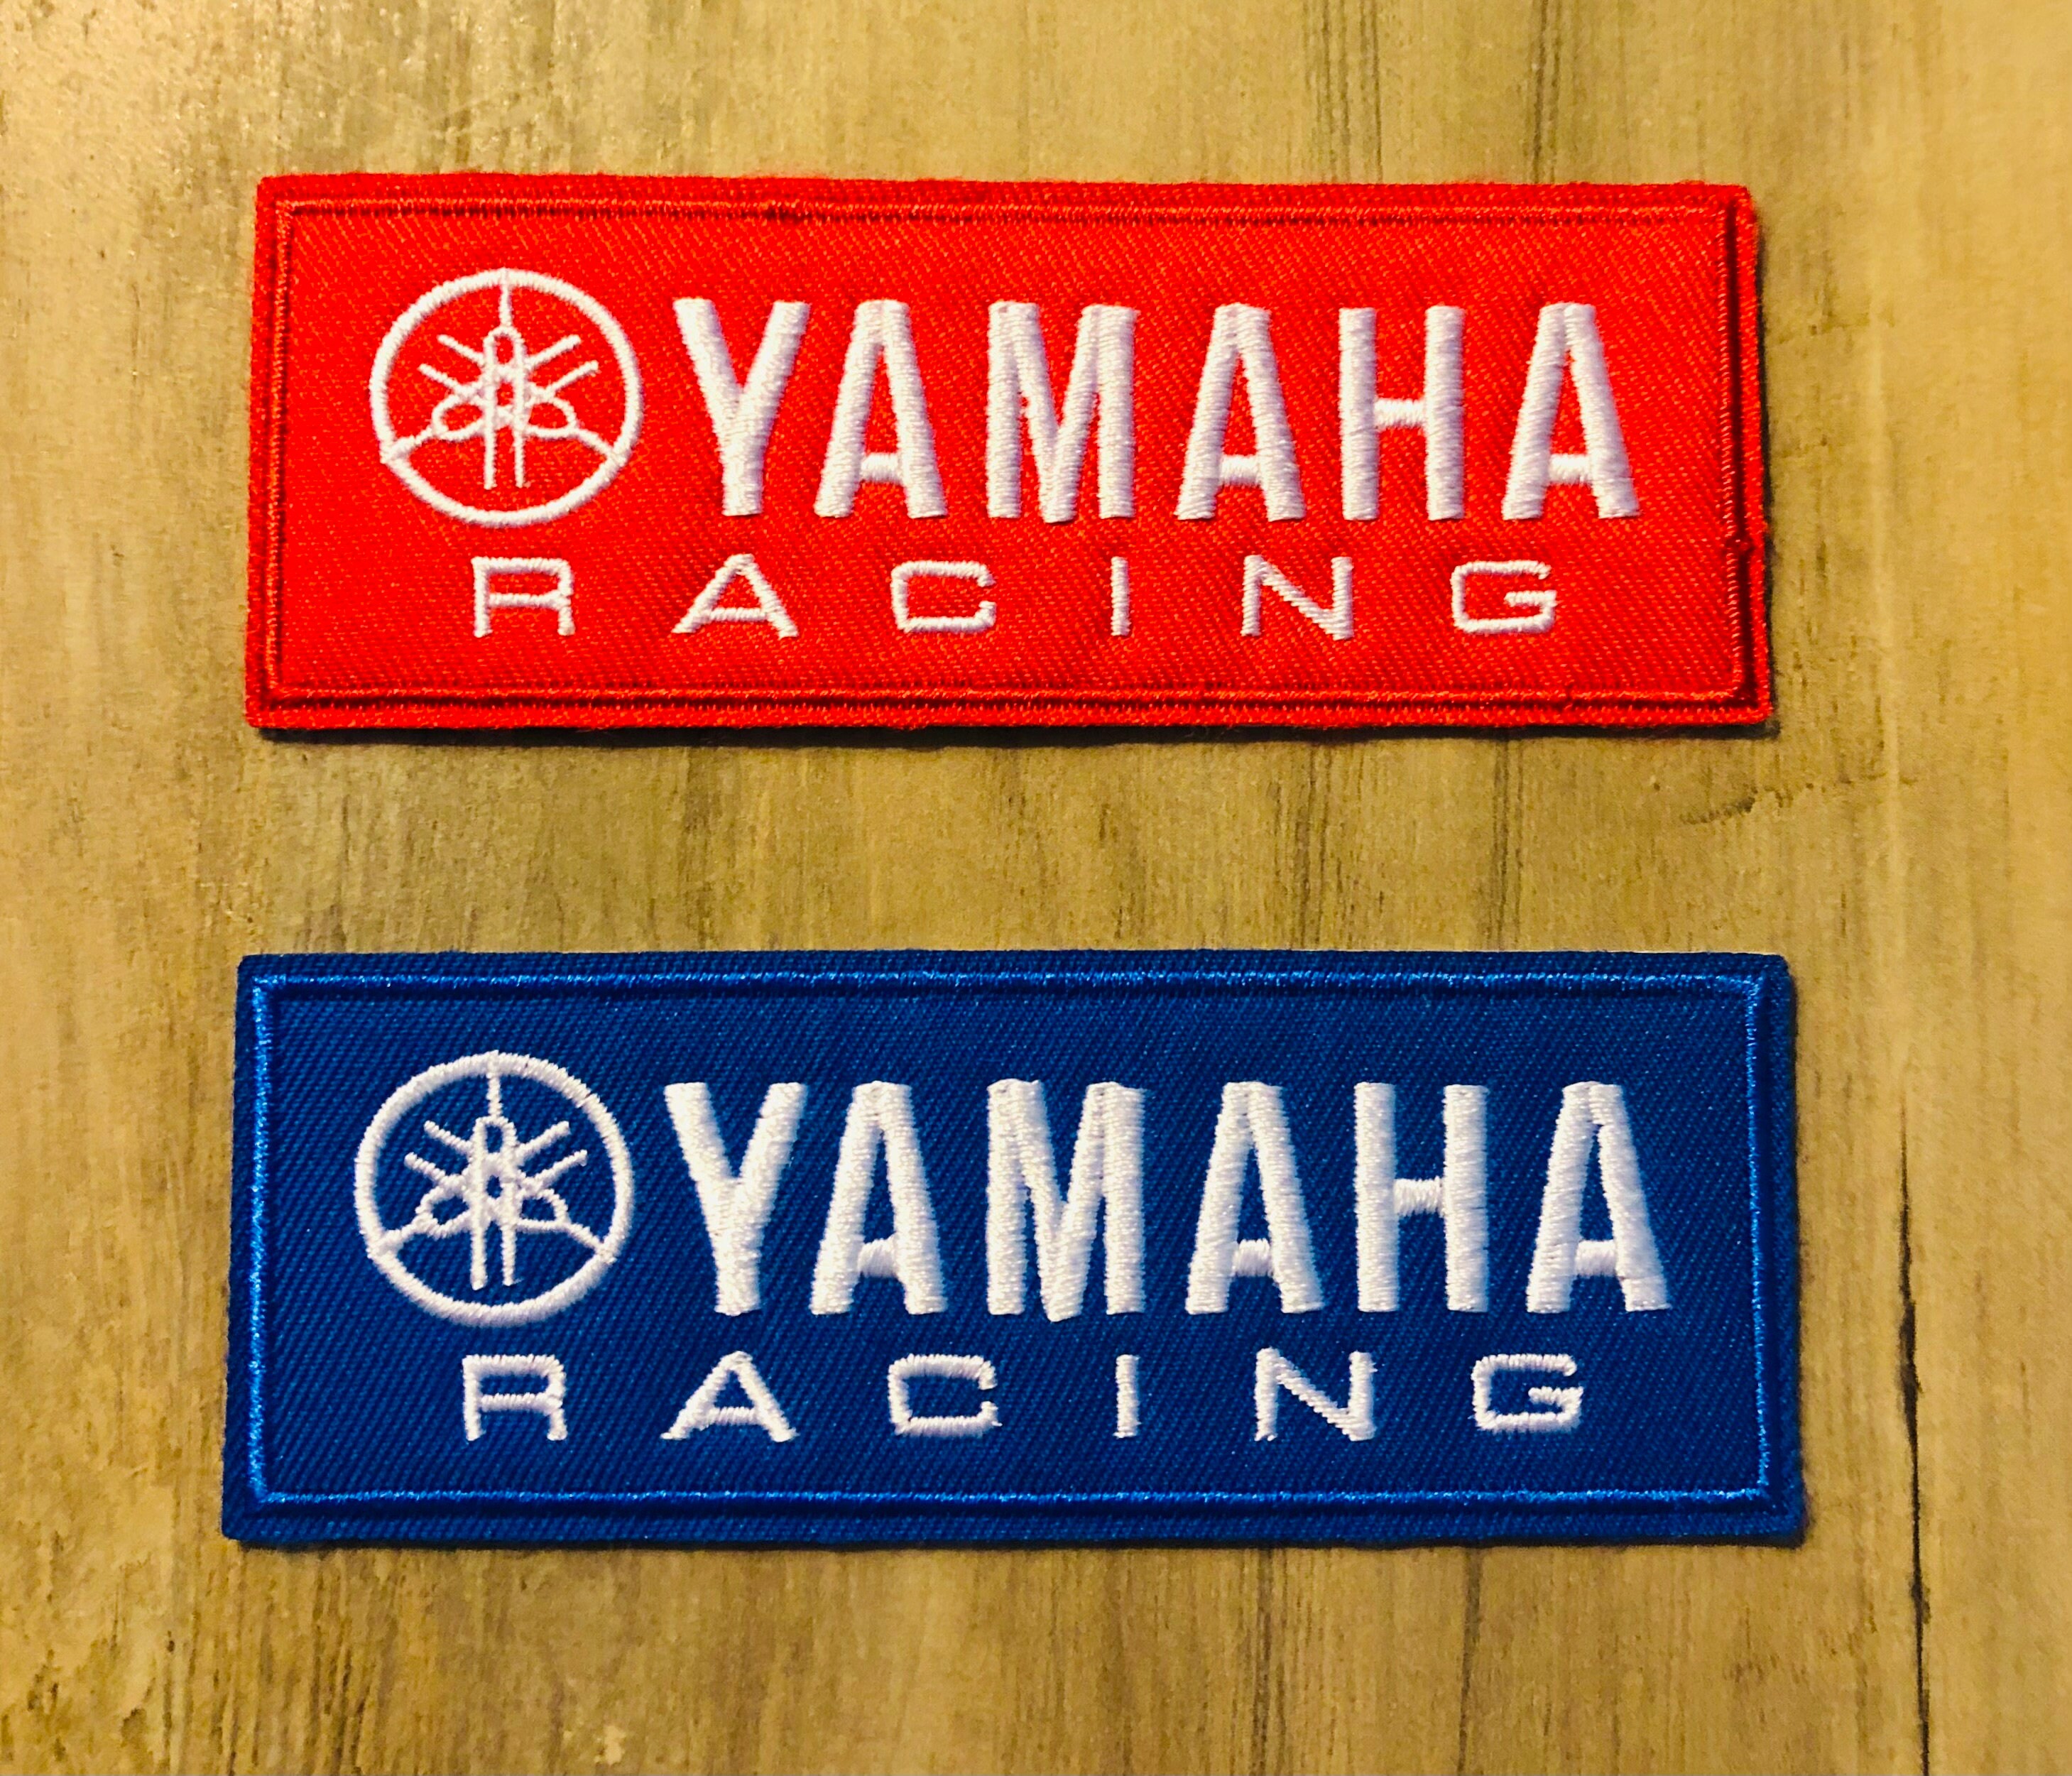 Wholesale Patch Sponsor Racing Embroidered Iron On Patch Applique Sew Random